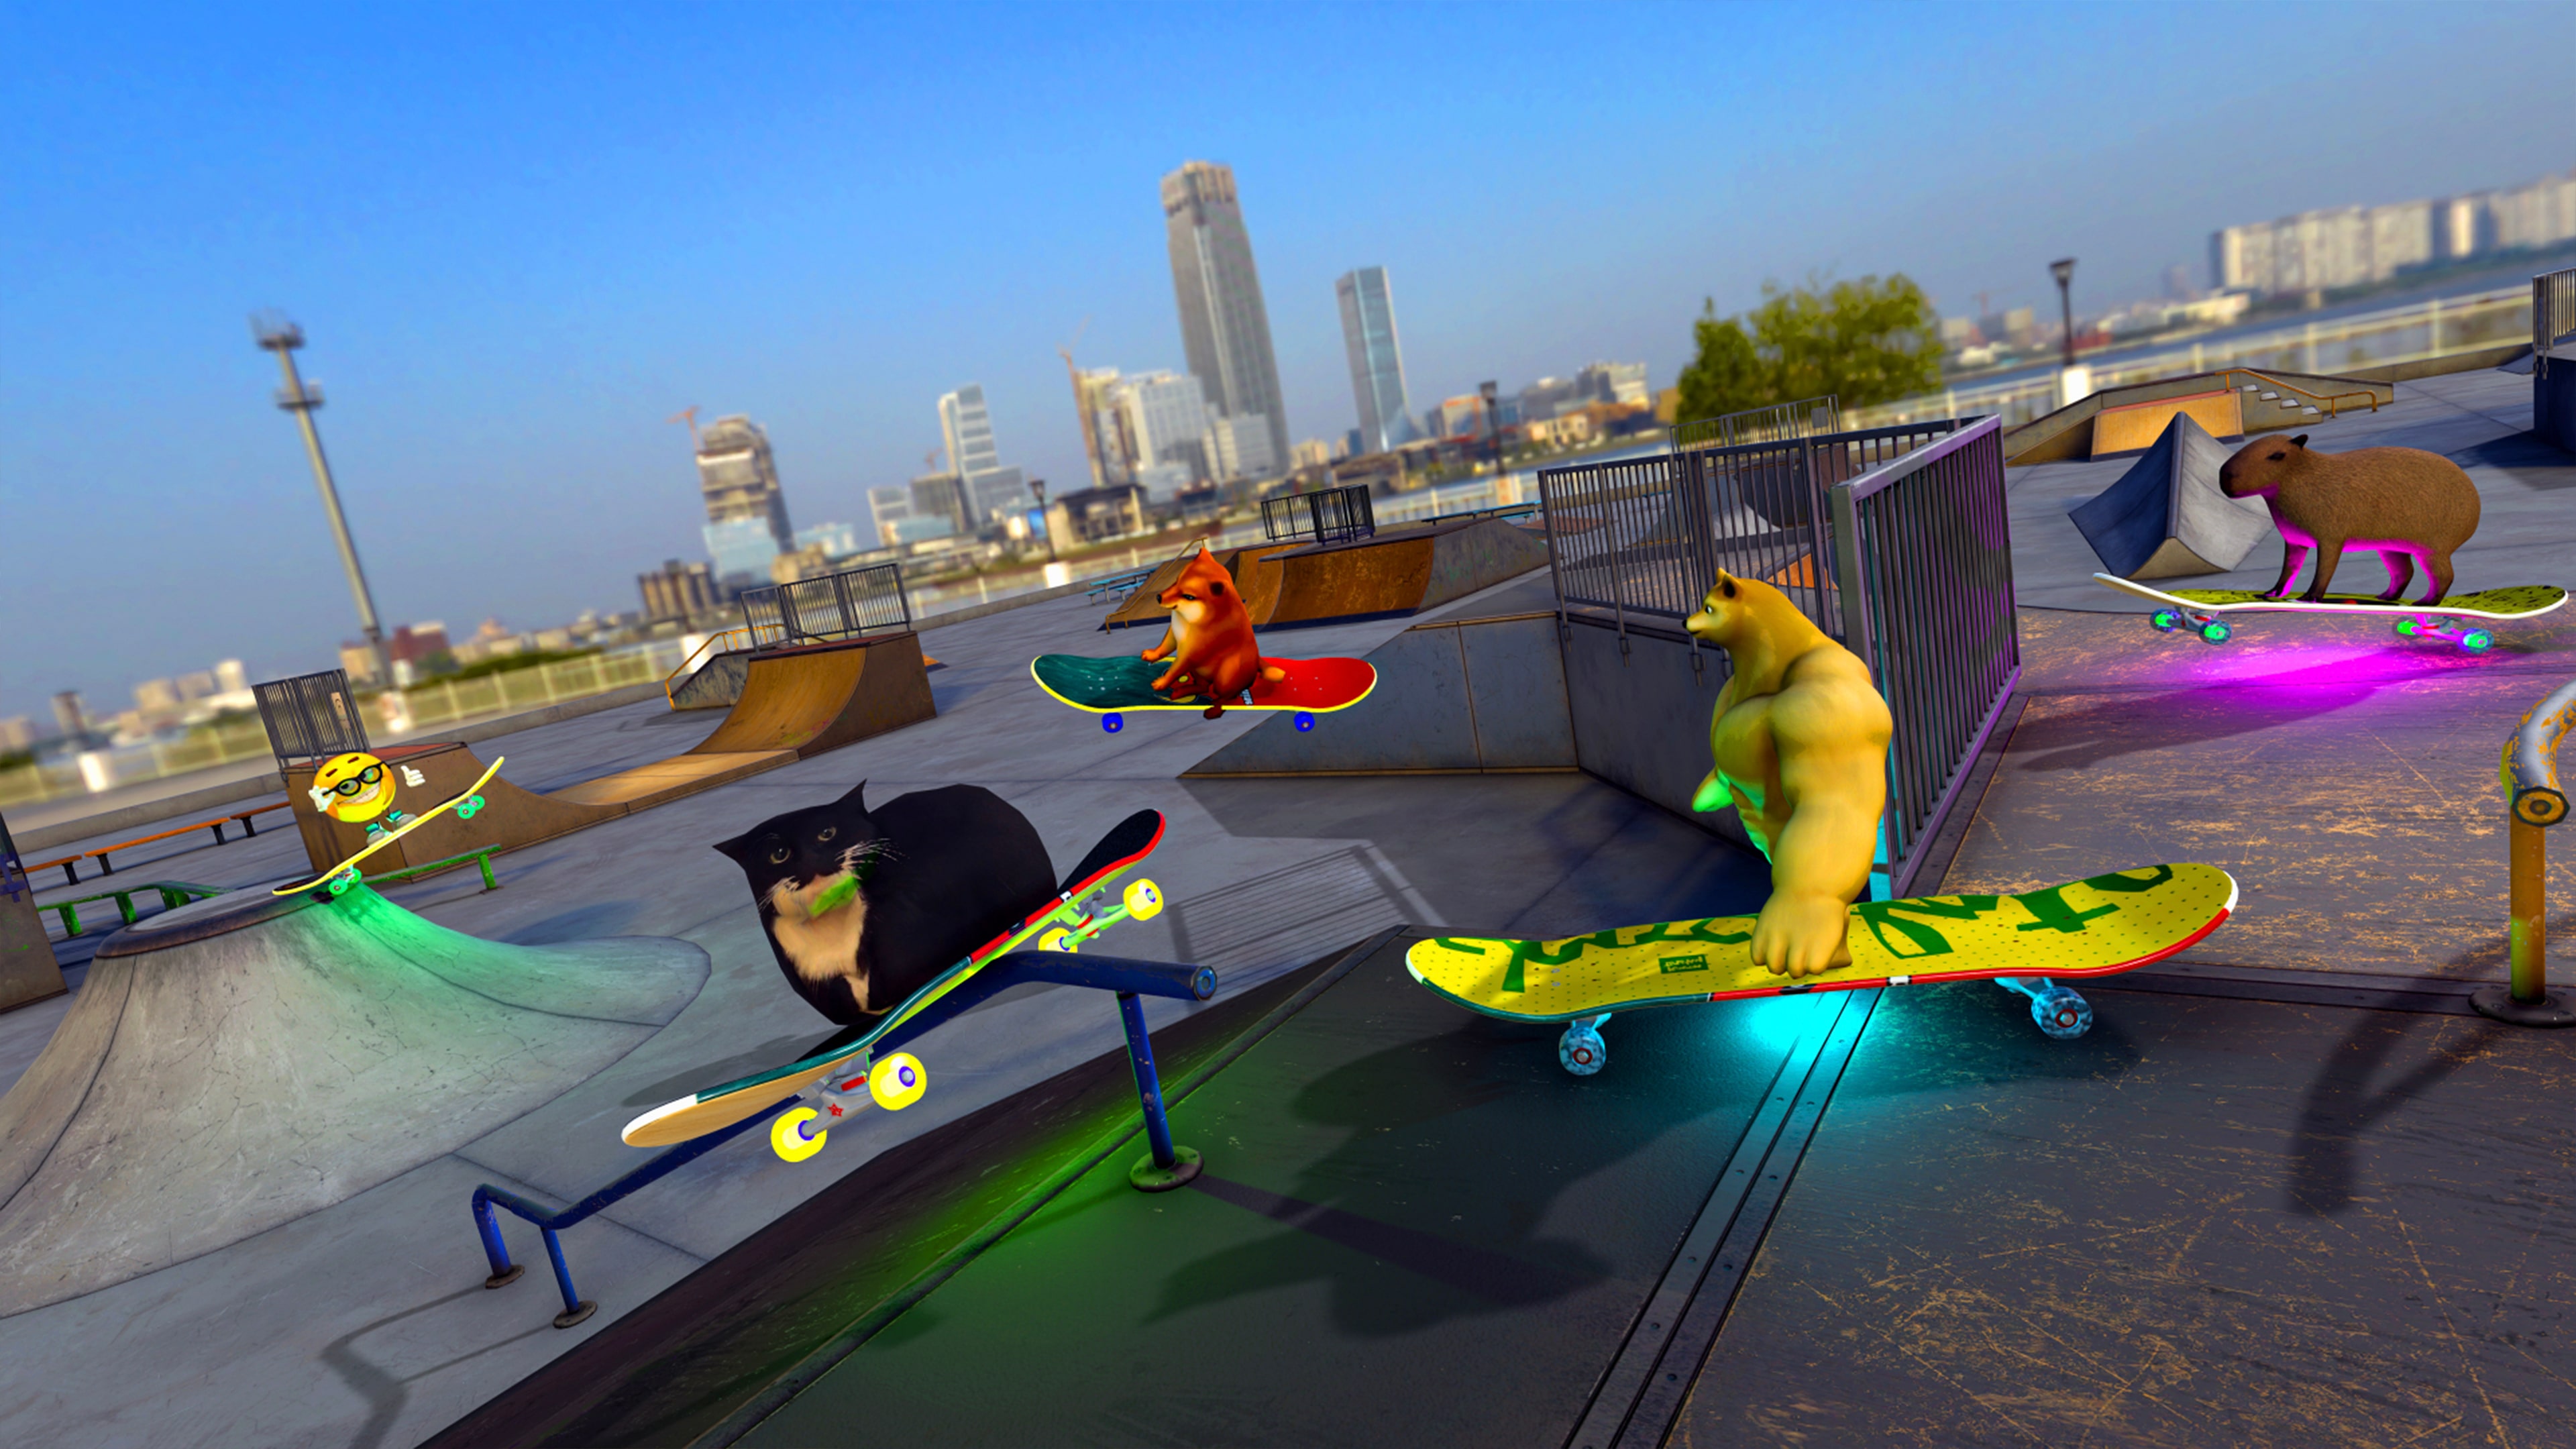 Skateboard Drifting Simulator with Maxwell Cat: The Game